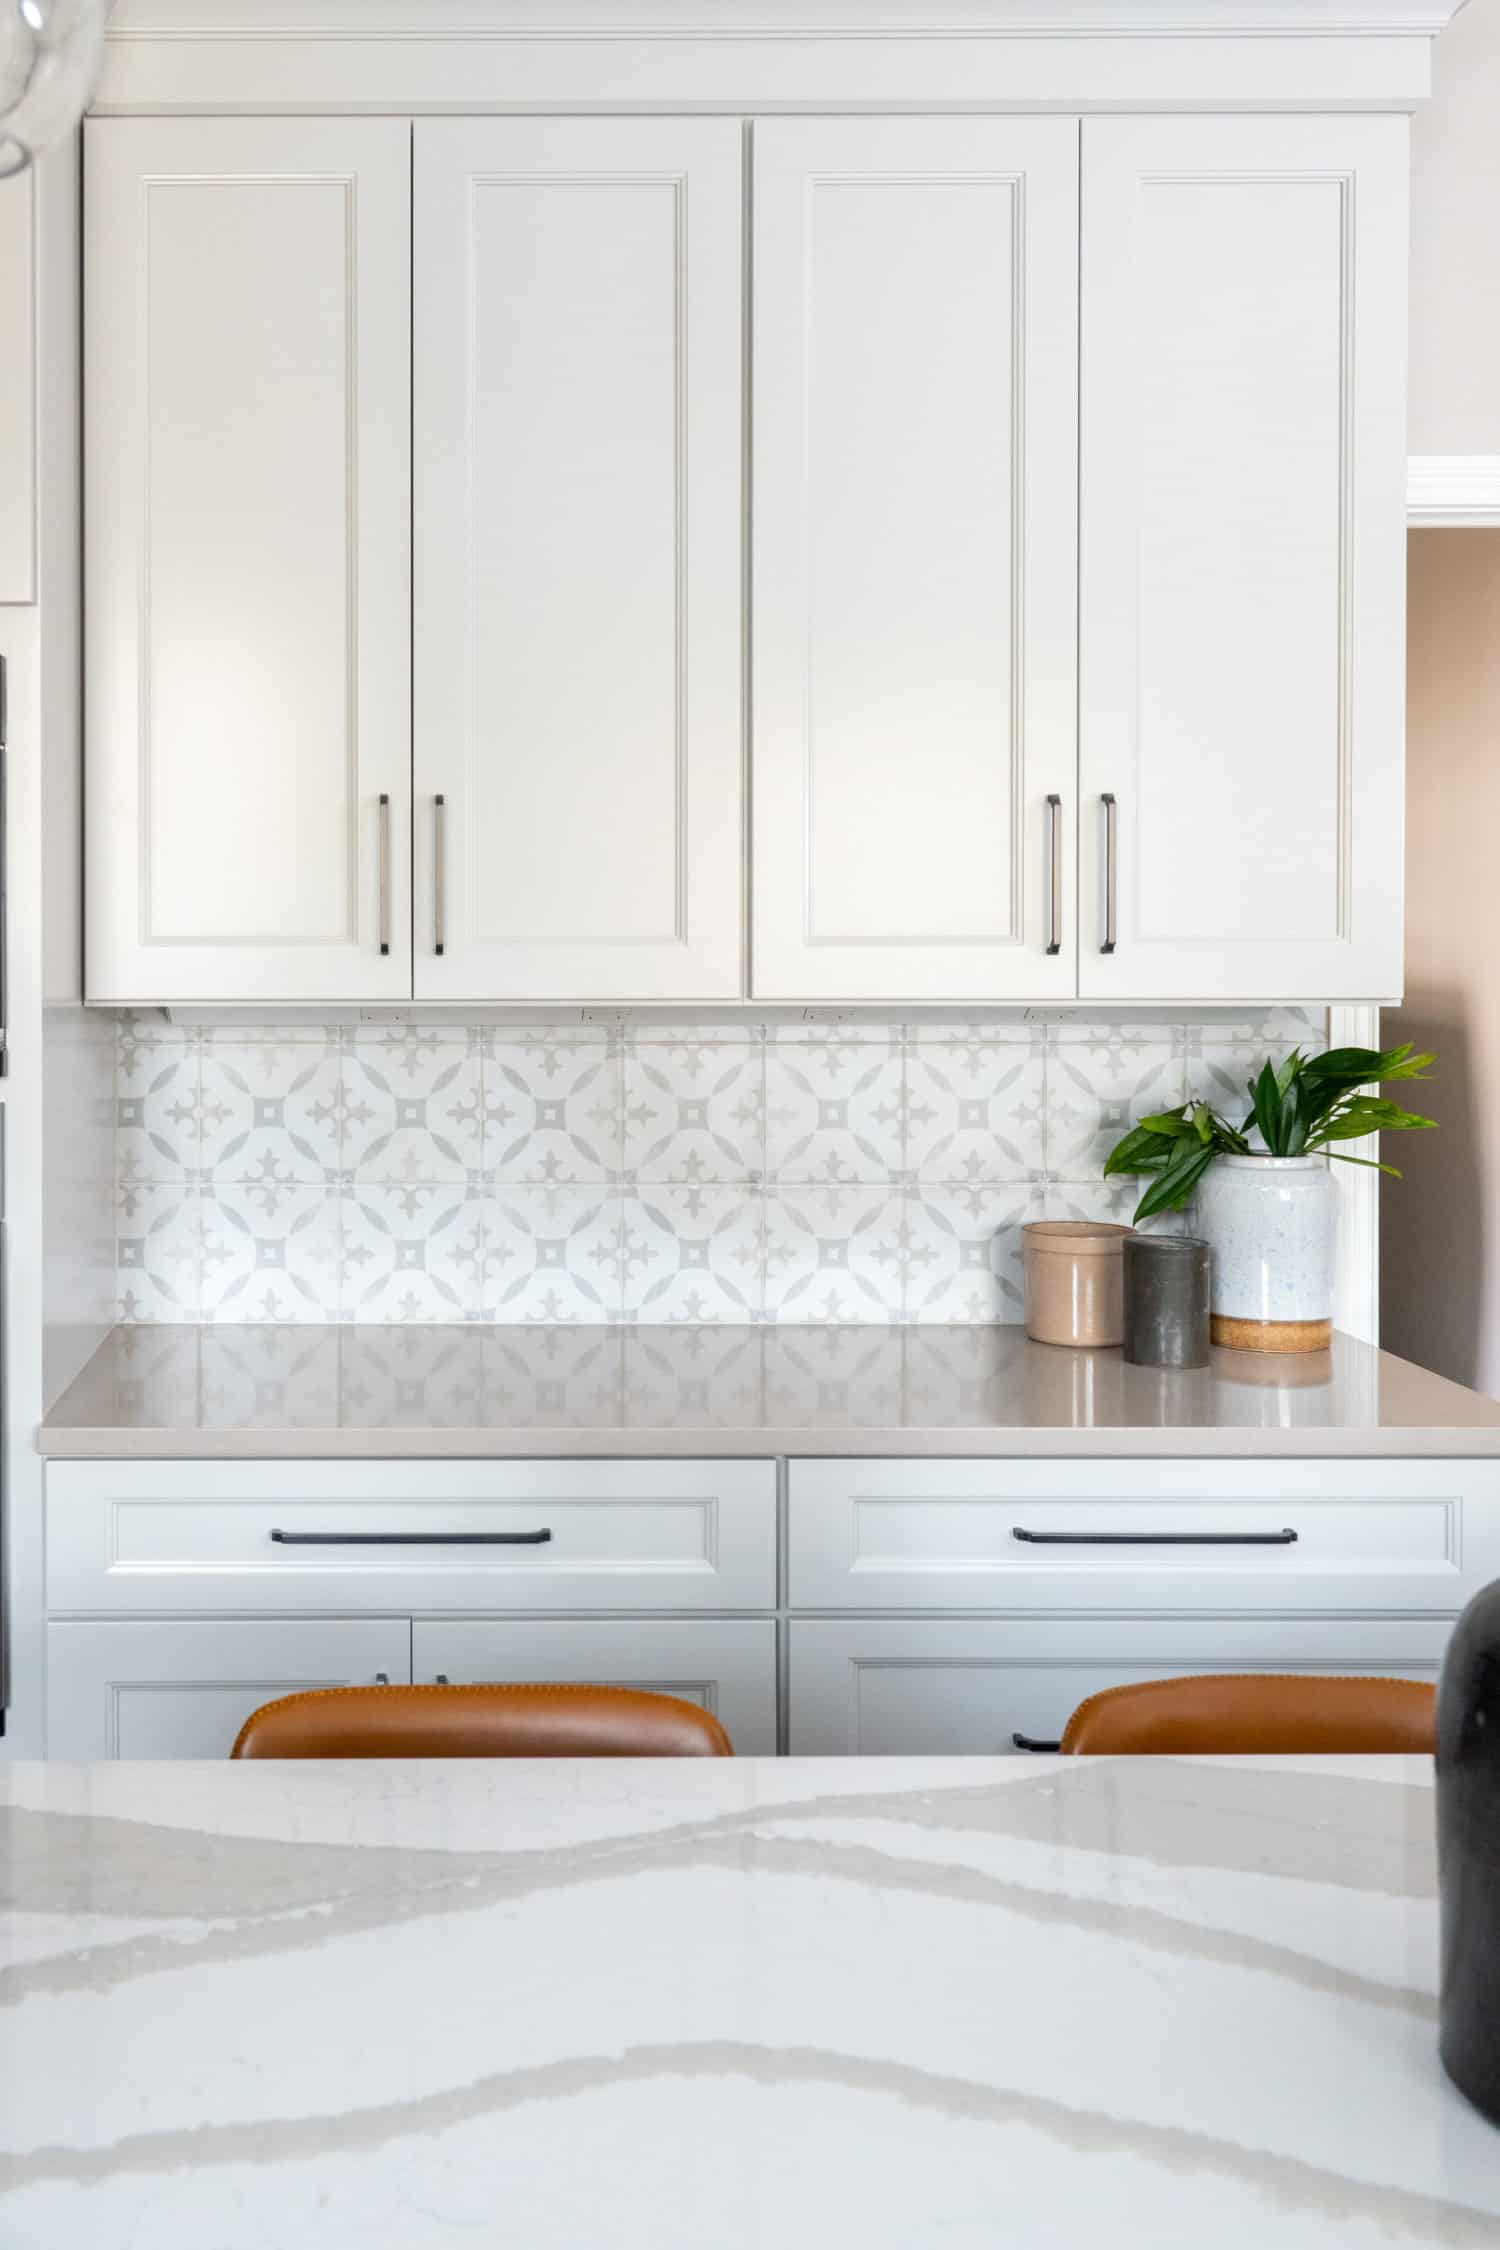 Nicholas Design Build | Remodel: A kitchen with remodeled white cabinets and marble counter tops.